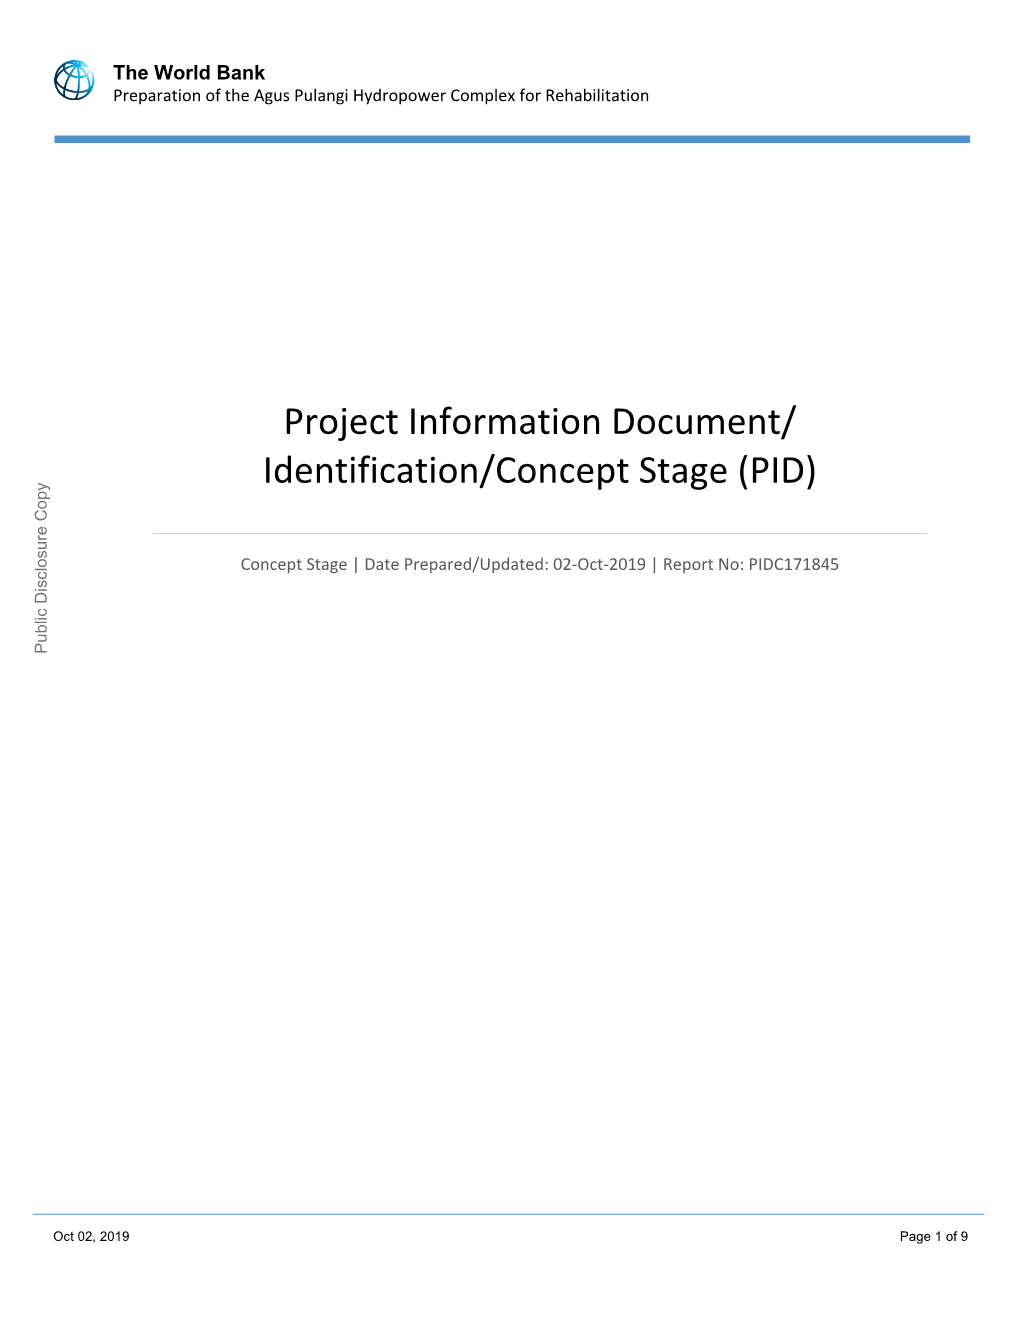 Project Information Document/ Identification/Concept Stage (PID)